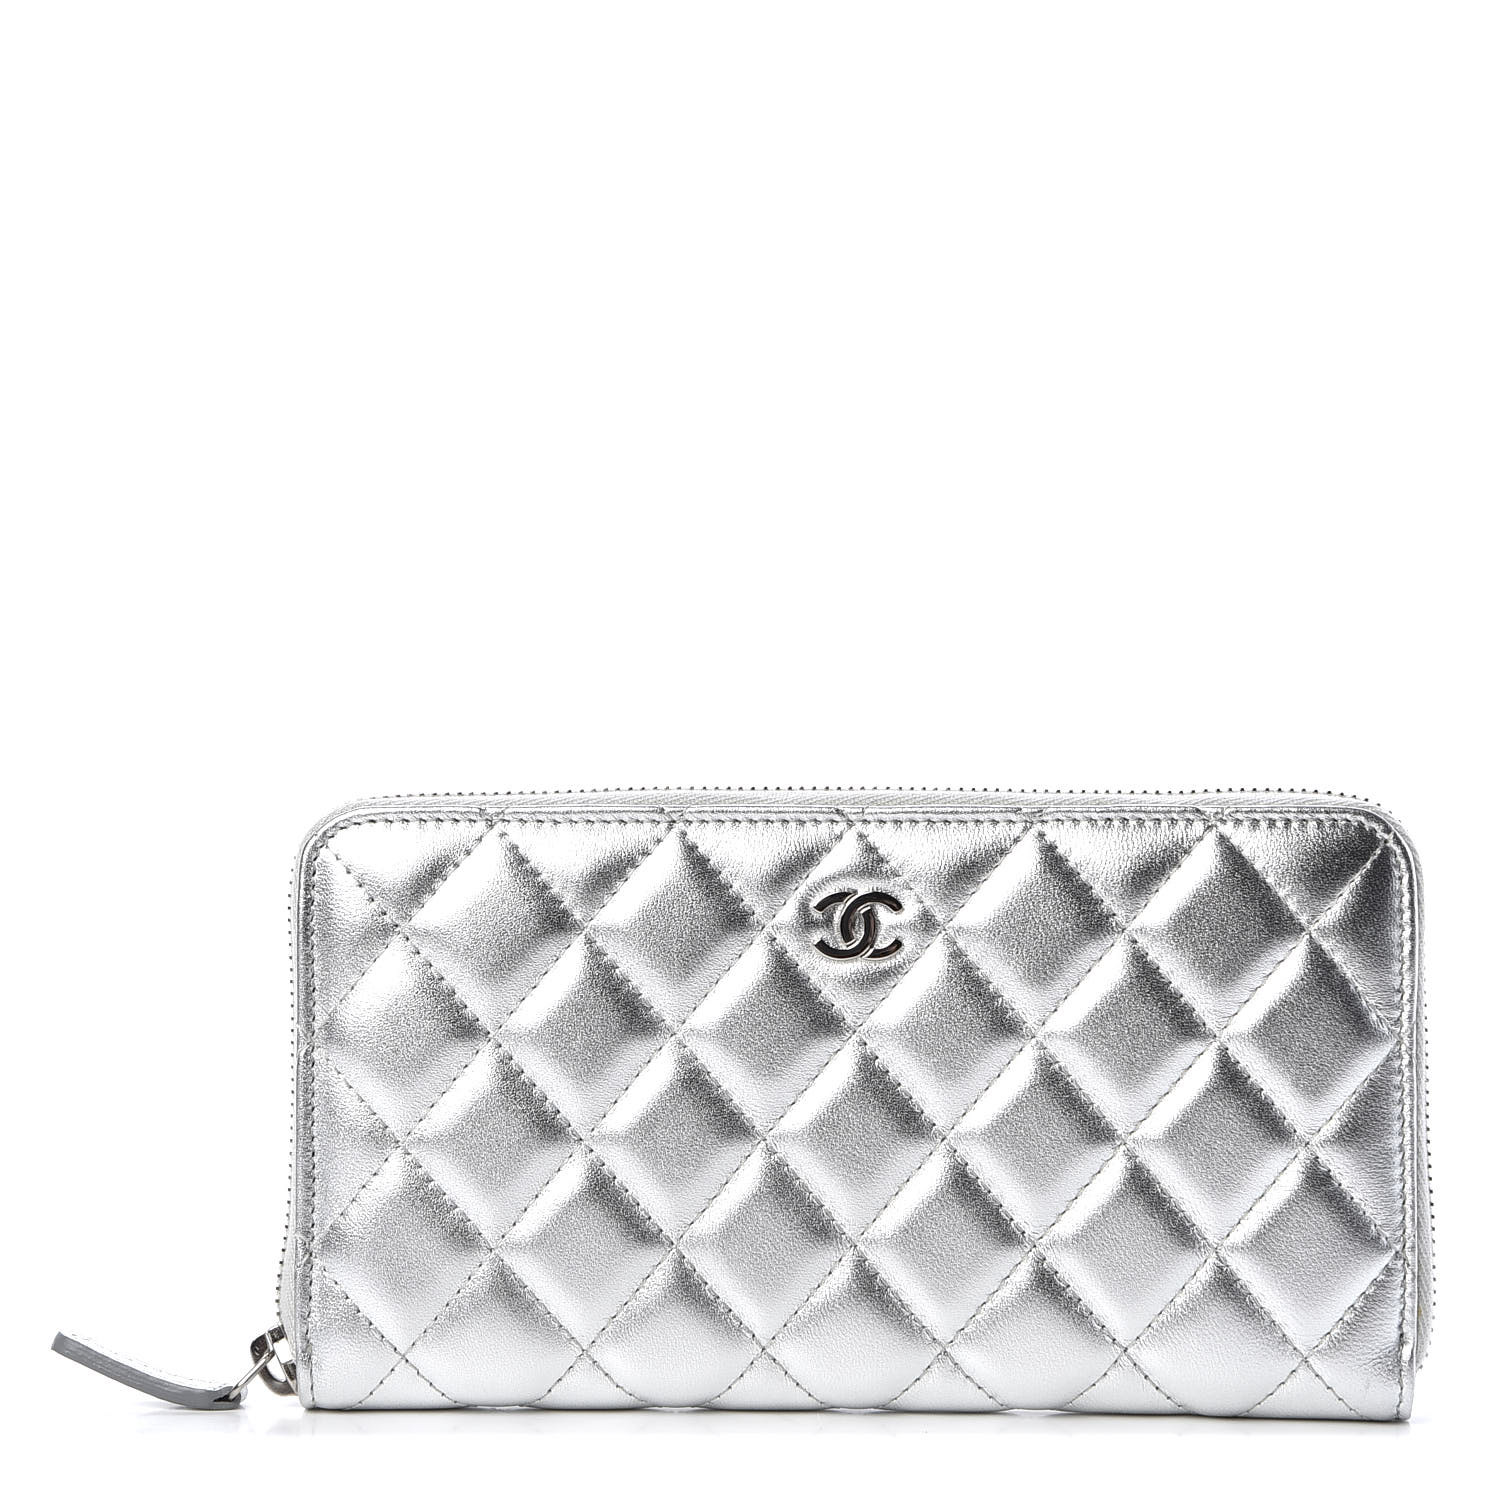 Chanel Metallic Lambskin Quilted Large Gusset Zip Around Wallet Silver Fashionphile